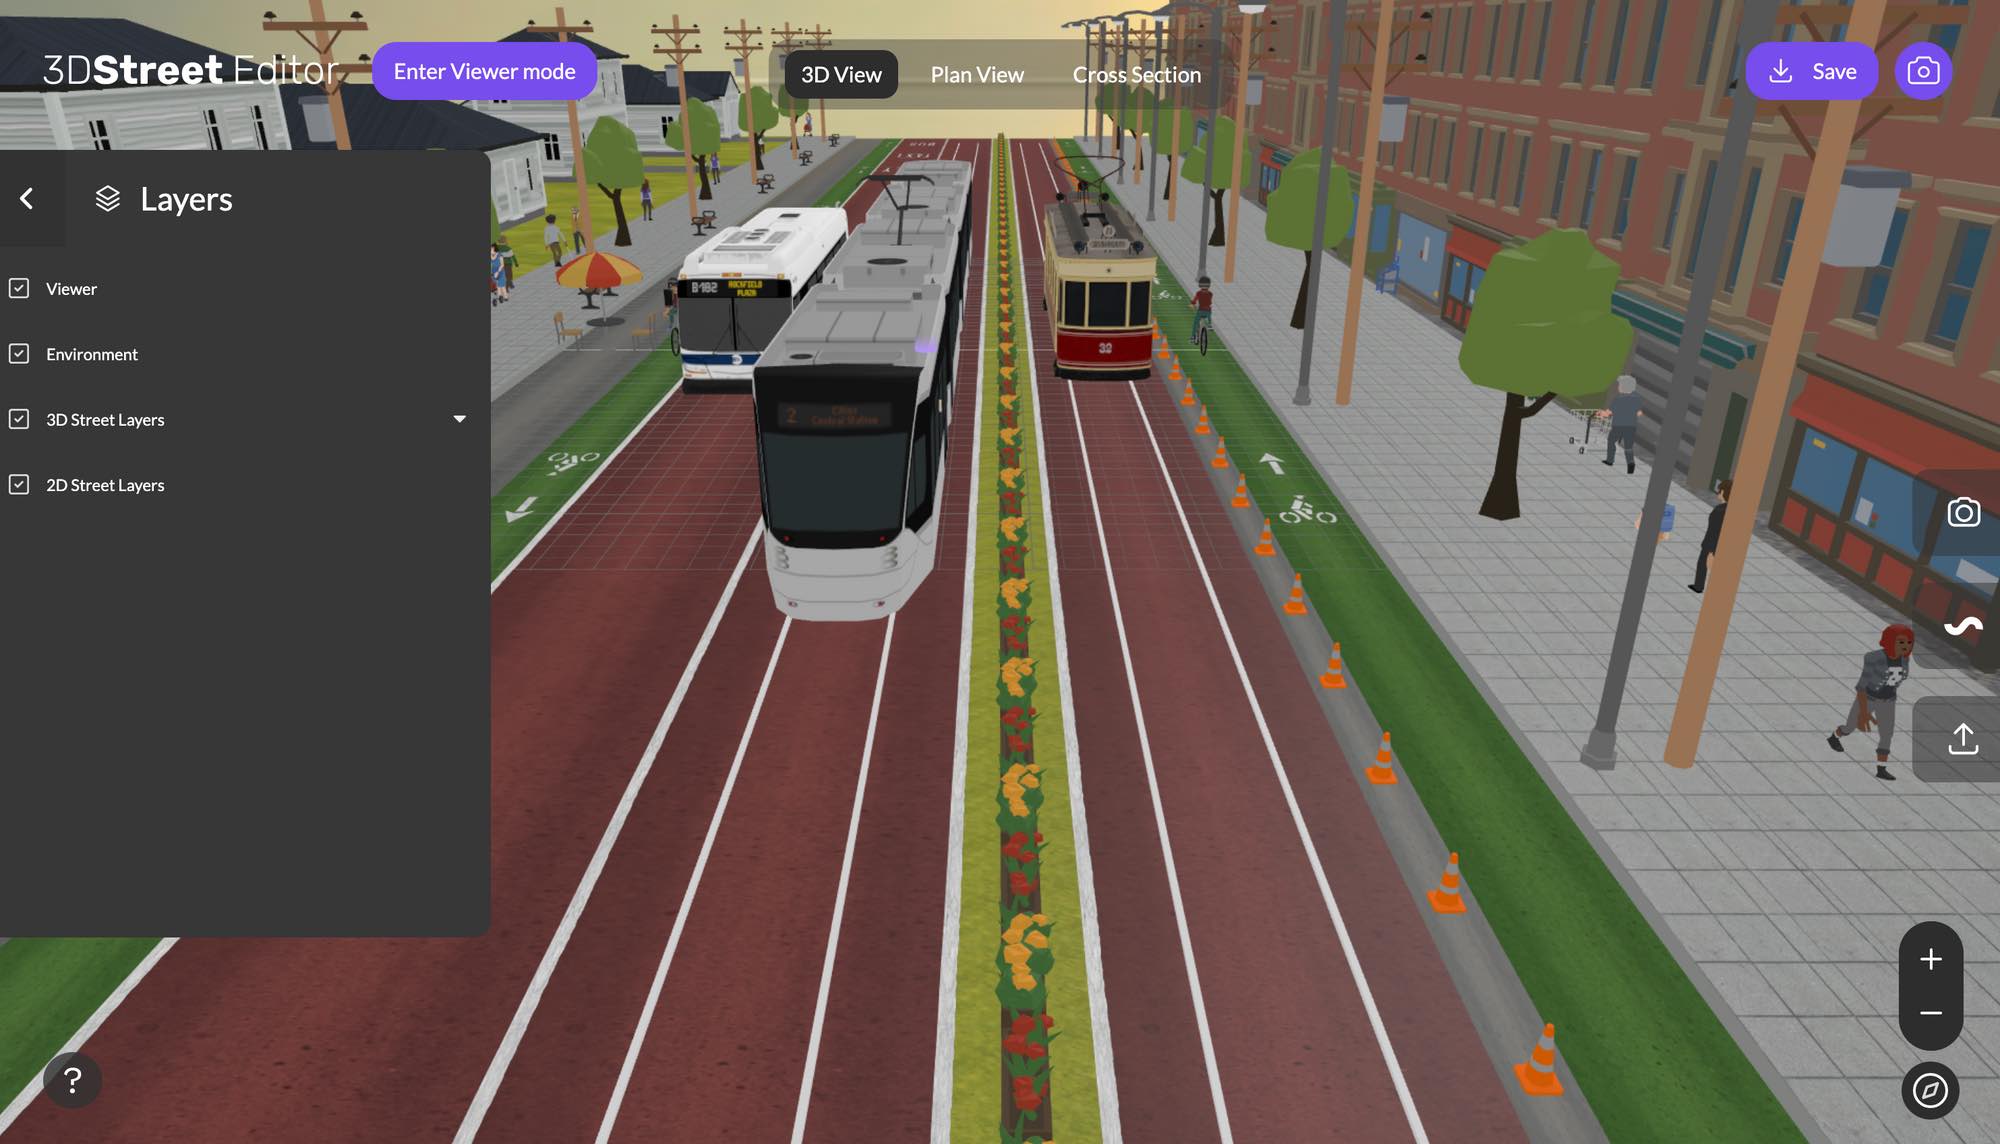 Screenshot of the 3DStreet Editor application with user interface elements for modifying a street scene.